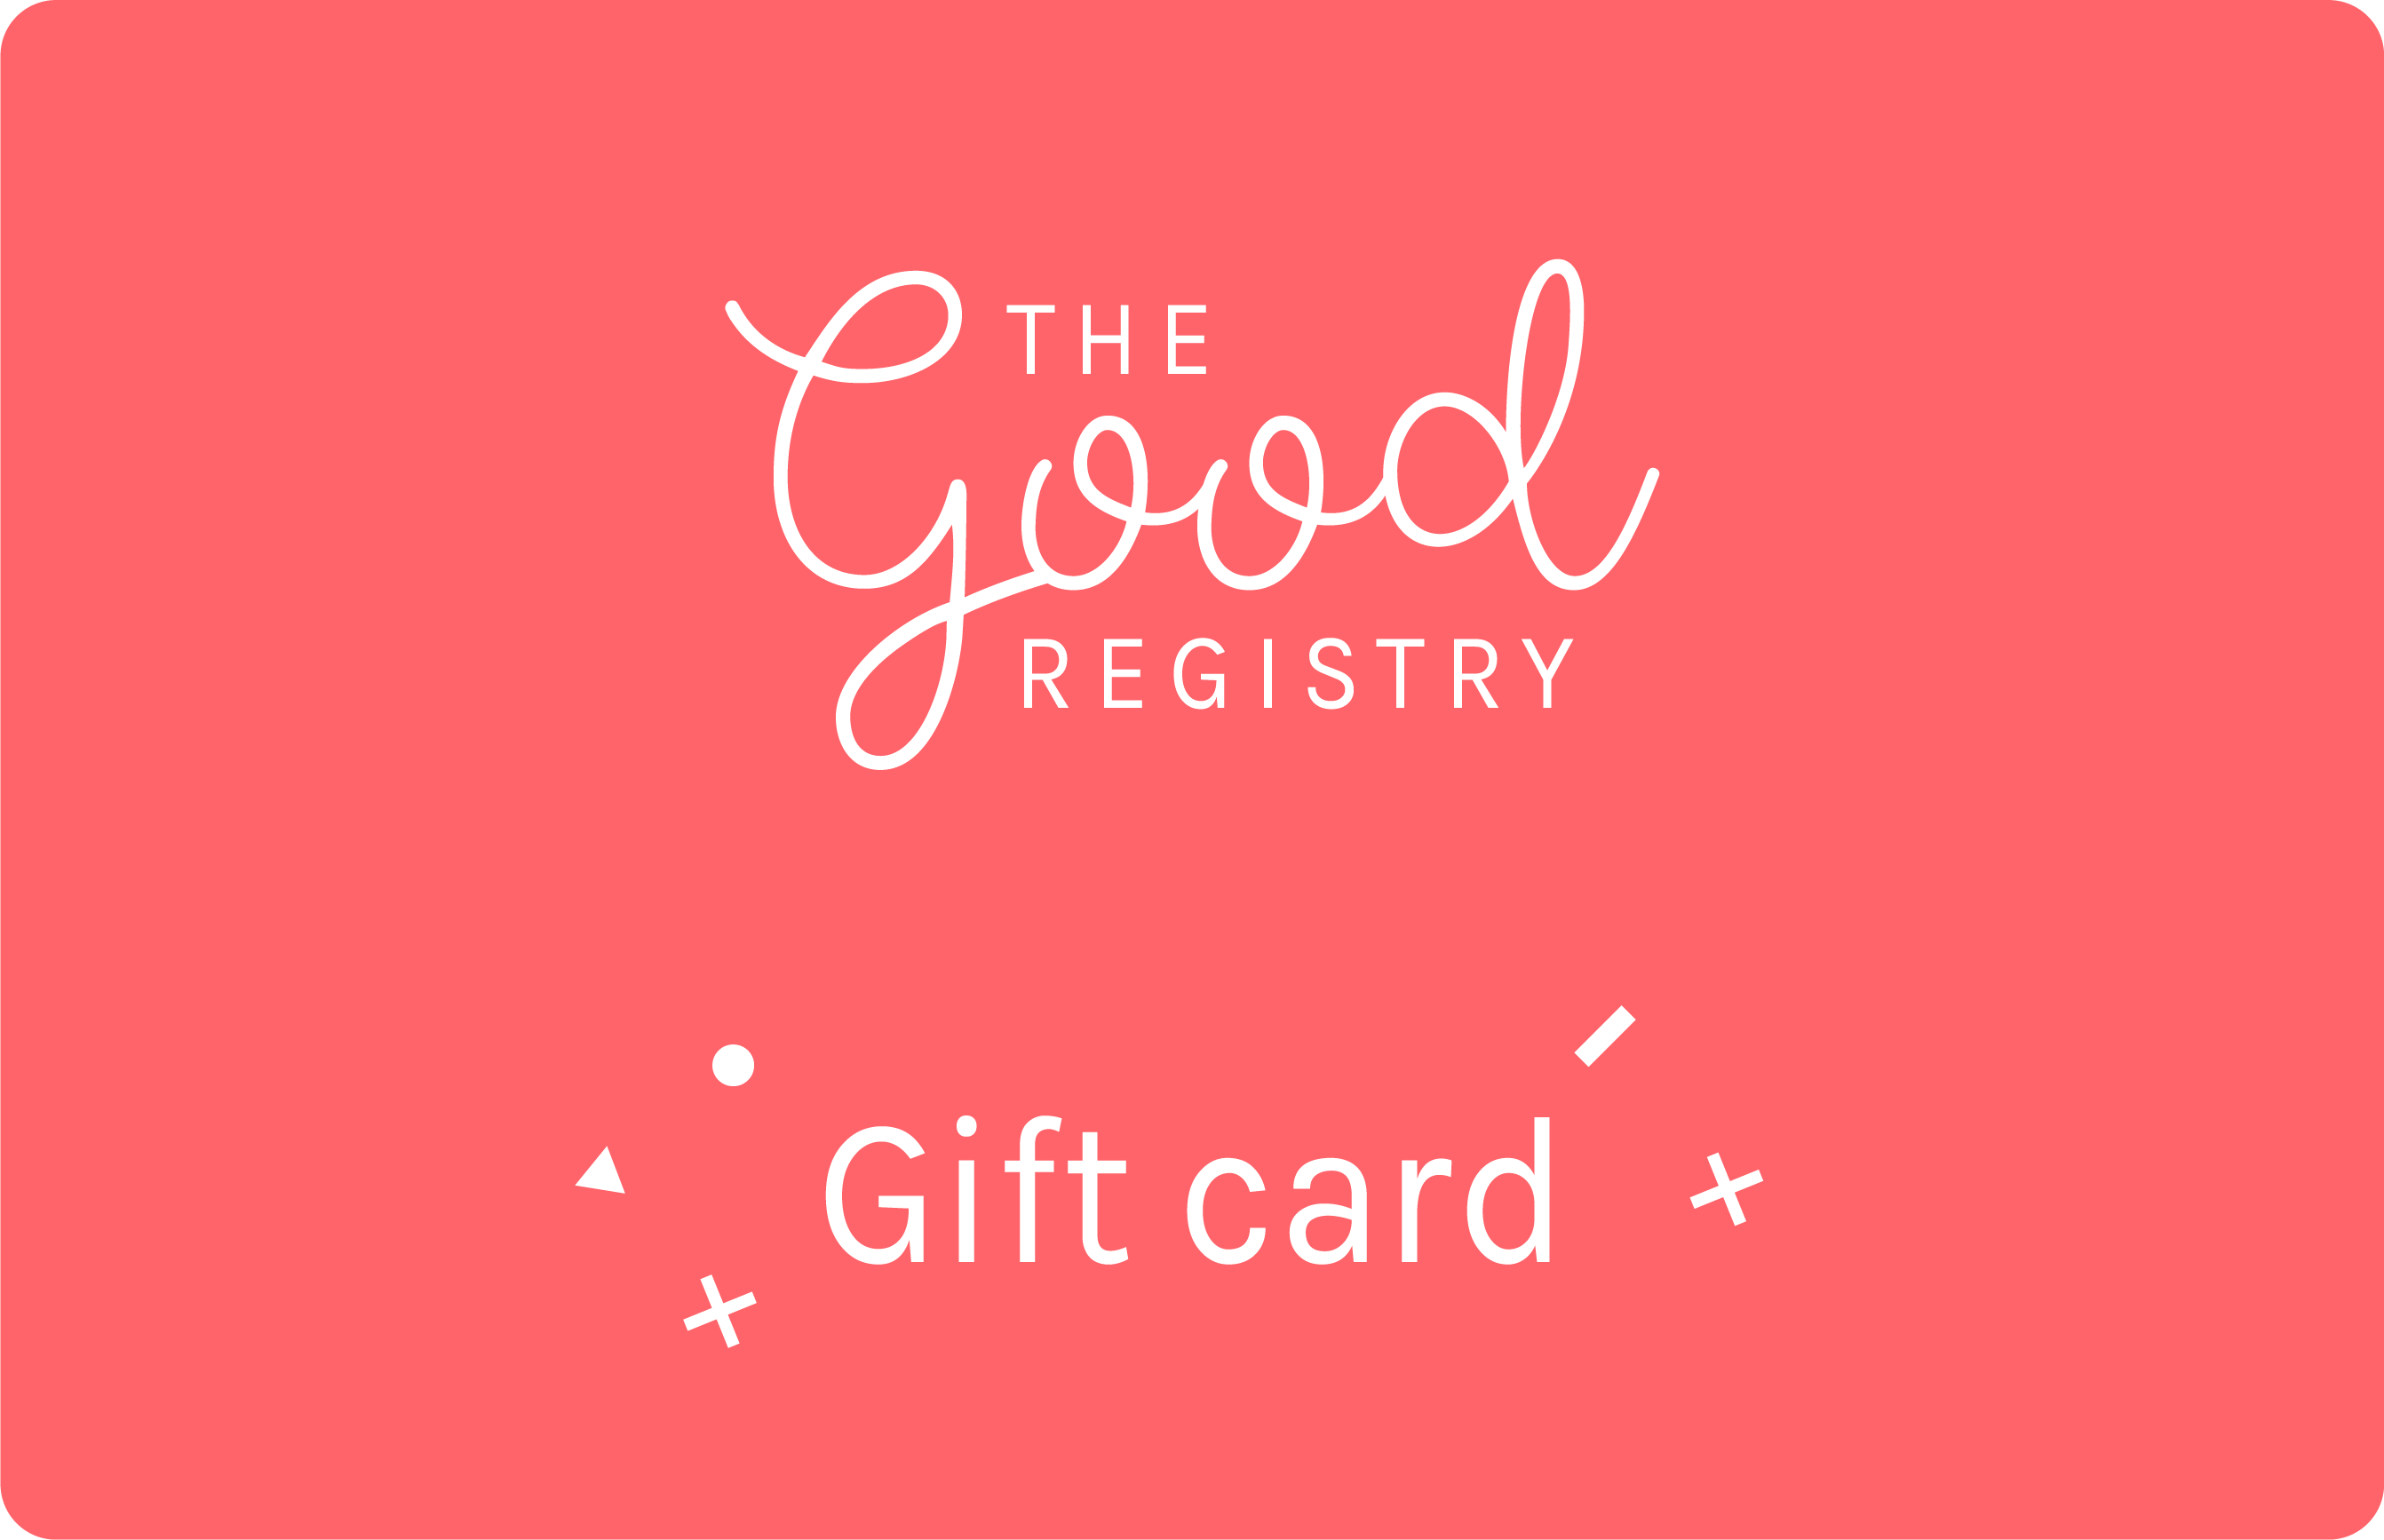 Give the gift of giving with Good Gift Cards